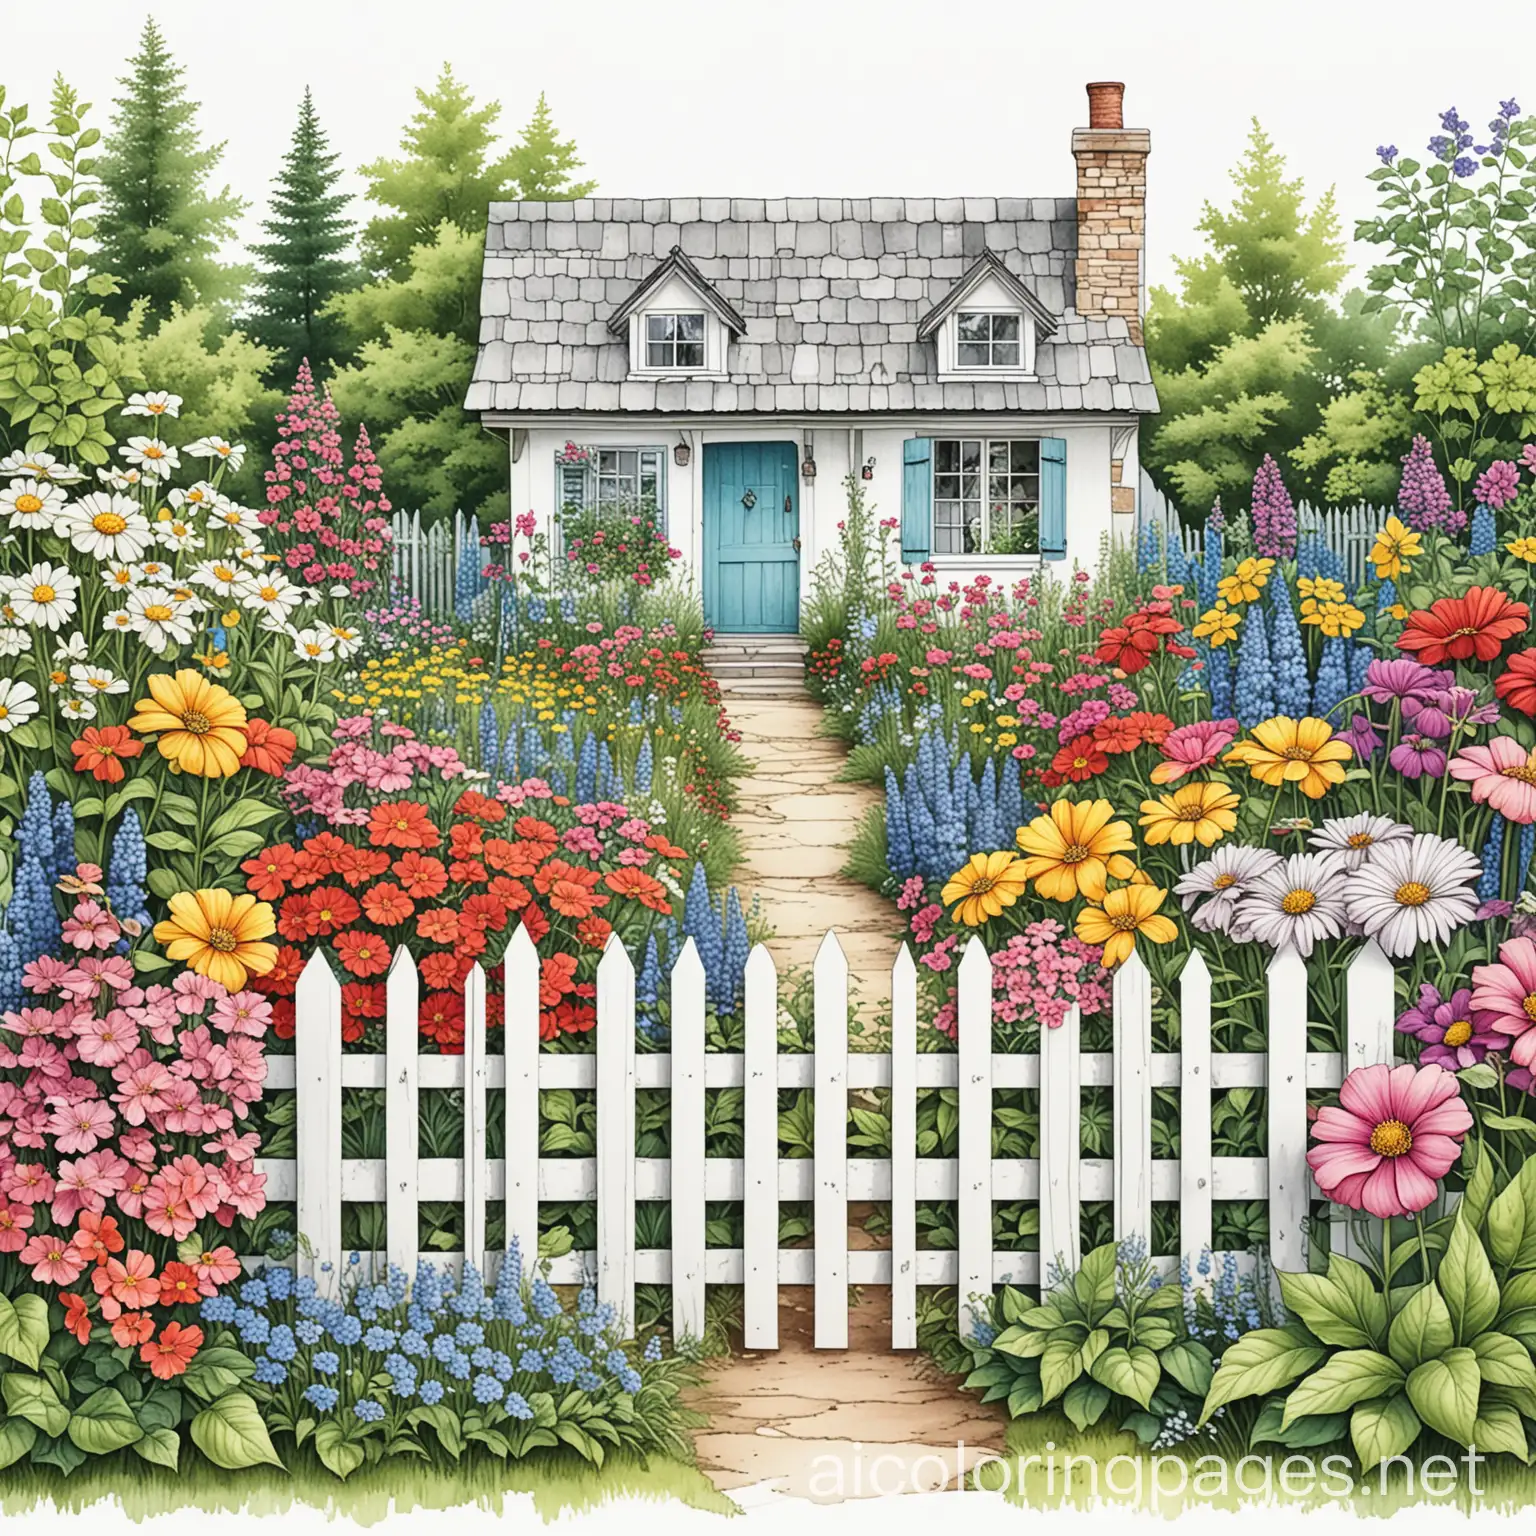 patchwork cottage garden with fence angling from right to left with colorful flowers, Coloring Page, black and white, line art, white background, Simplicity, Ample White Space. The background of the coloring page is plain white to make it easy for young children to color within the lines. The outlines of all the subjects are easy to distinguish, making it simple for kids to color without too much difficulty